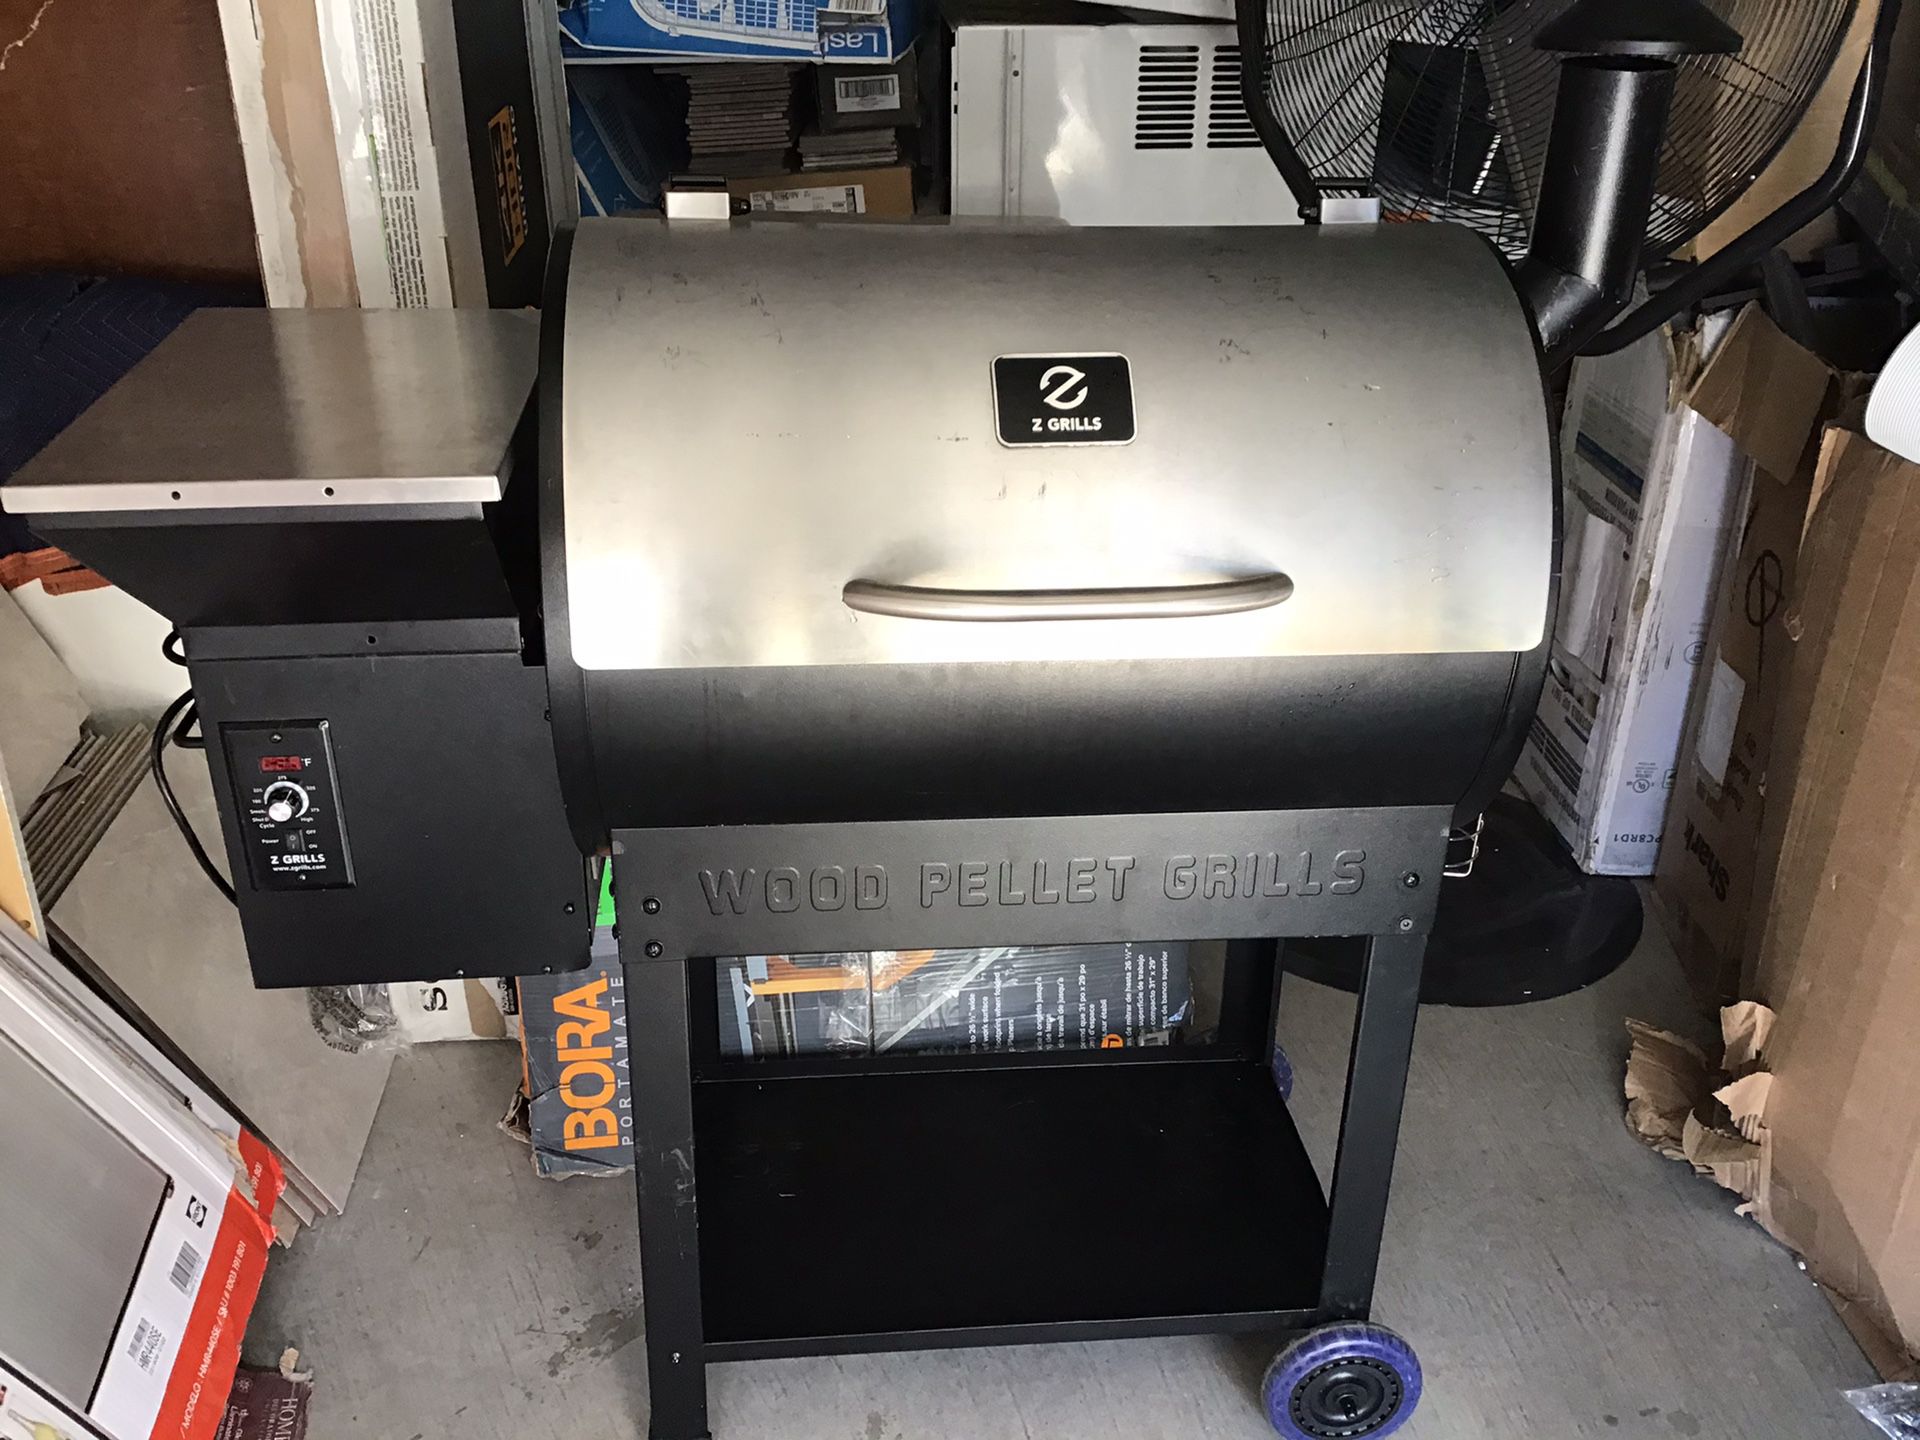 Z Grills wood pellet grill smoker outdoor cooking ZPG7002E new excellent condition open box and assembled